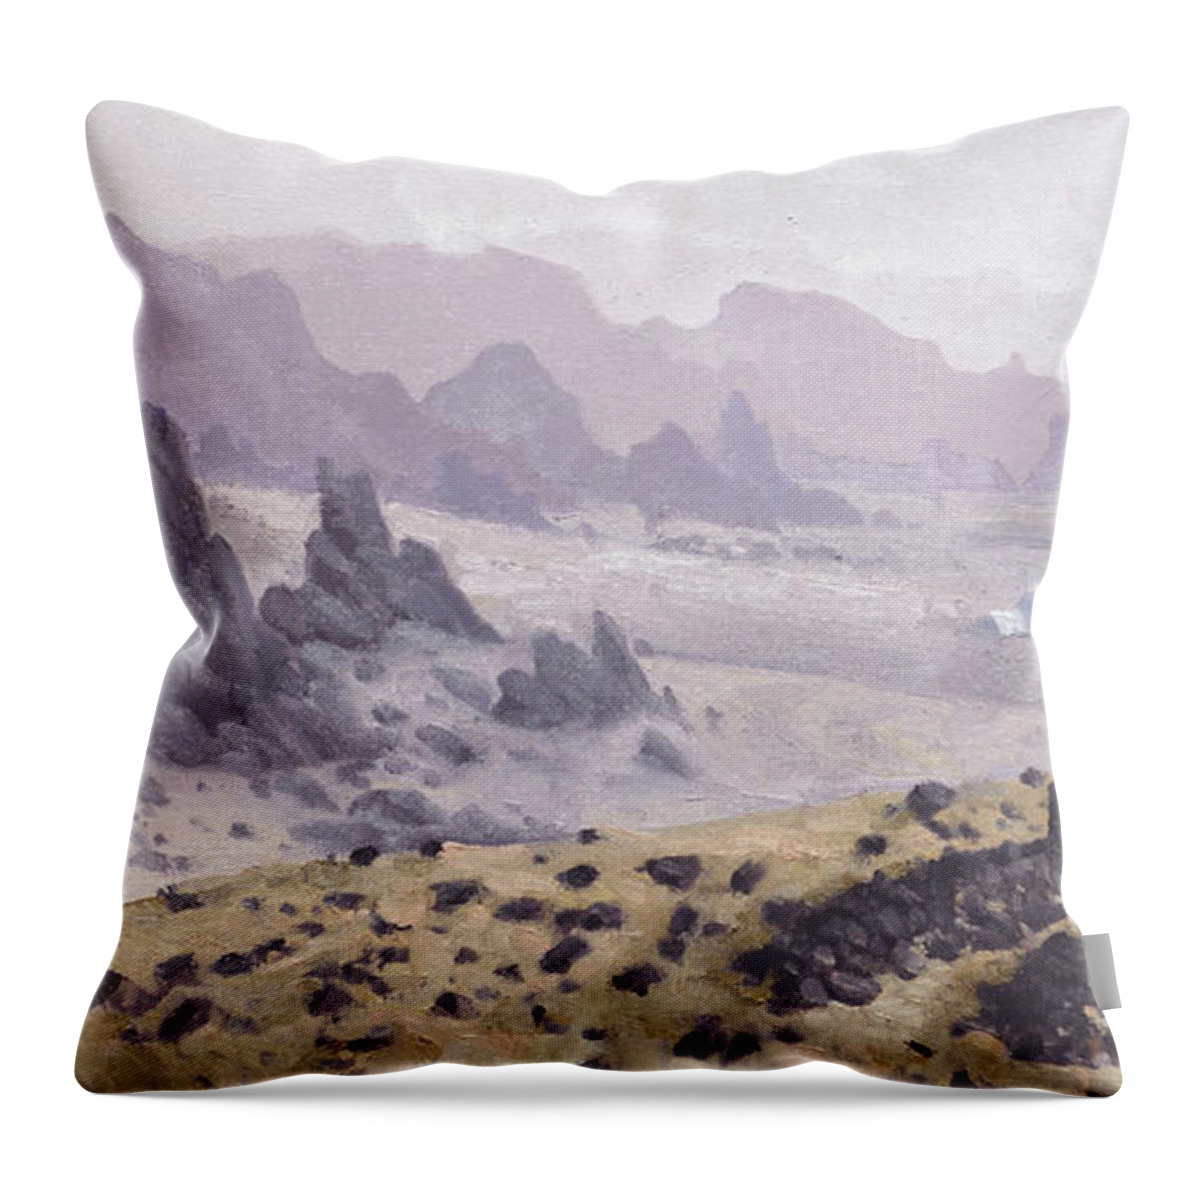  Throw Pillow featuring the painting The Pioneers by Armand Cabrera